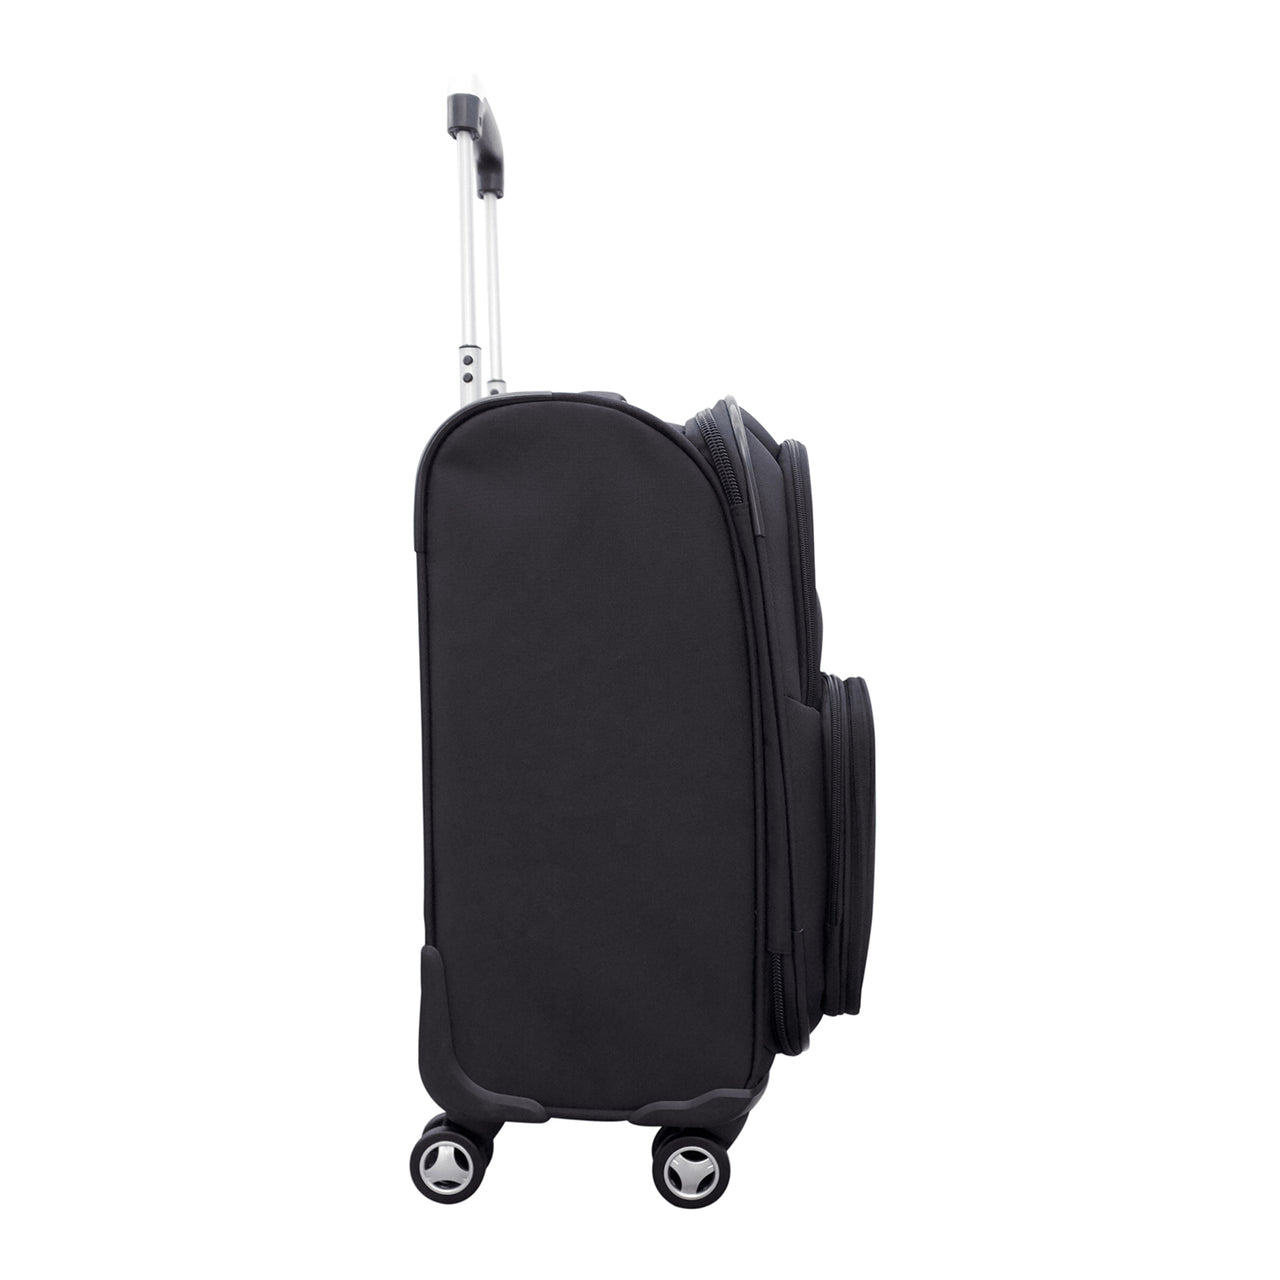 Grizzlies Luggage | Montana Grizzlies 21" Carry-on Spinner Luggage